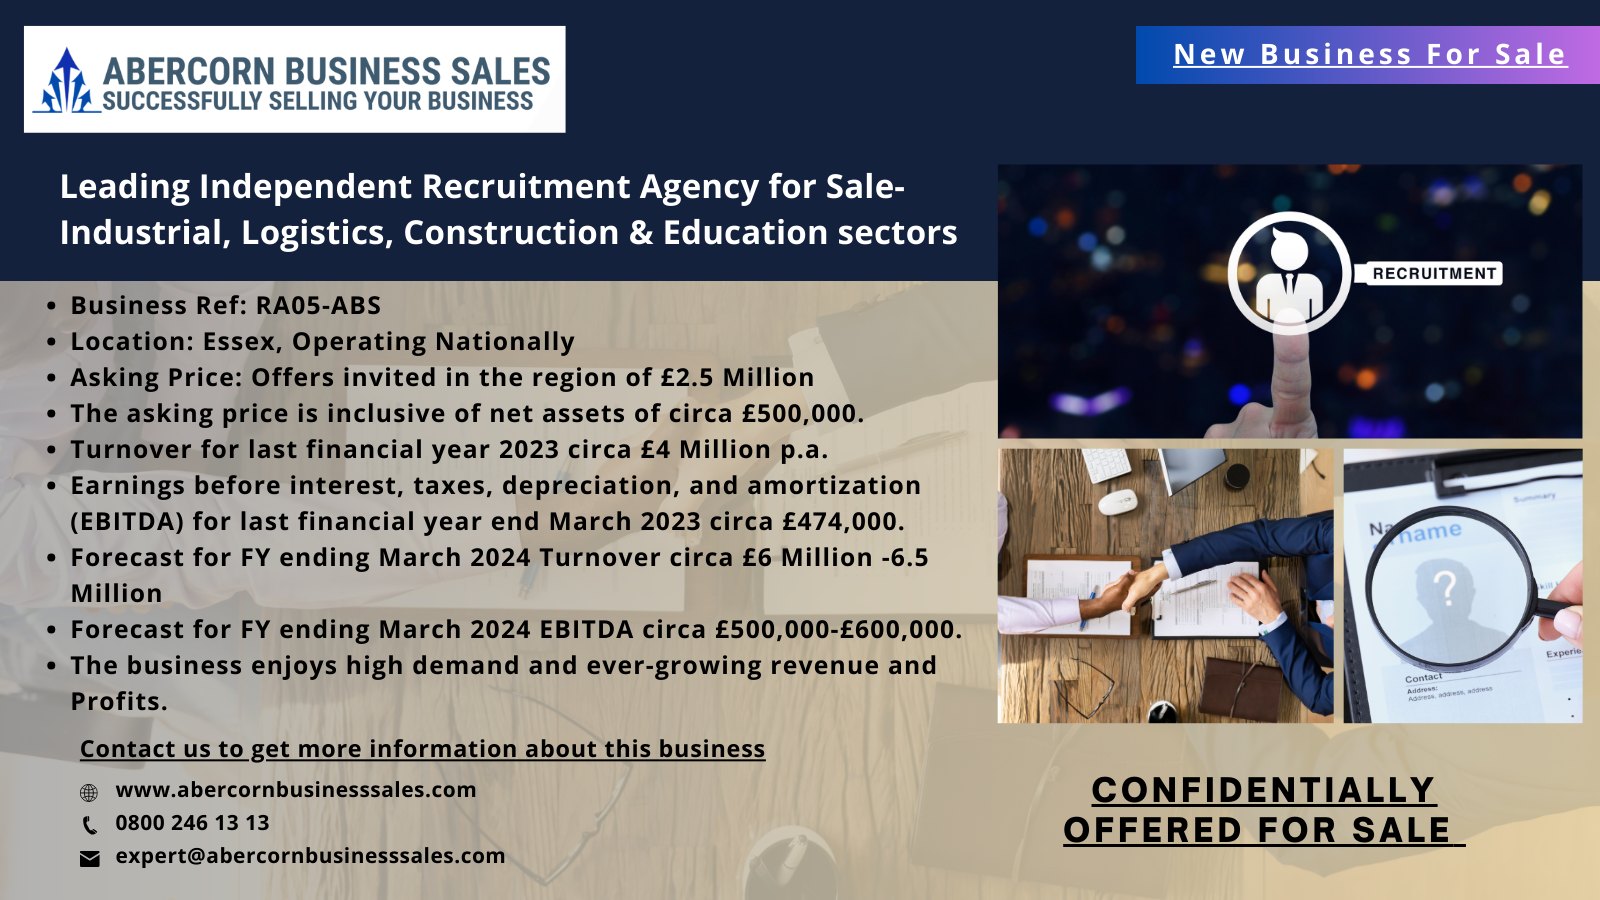 RA05-ABS - Leading Independent Recruitment Agency for Sale